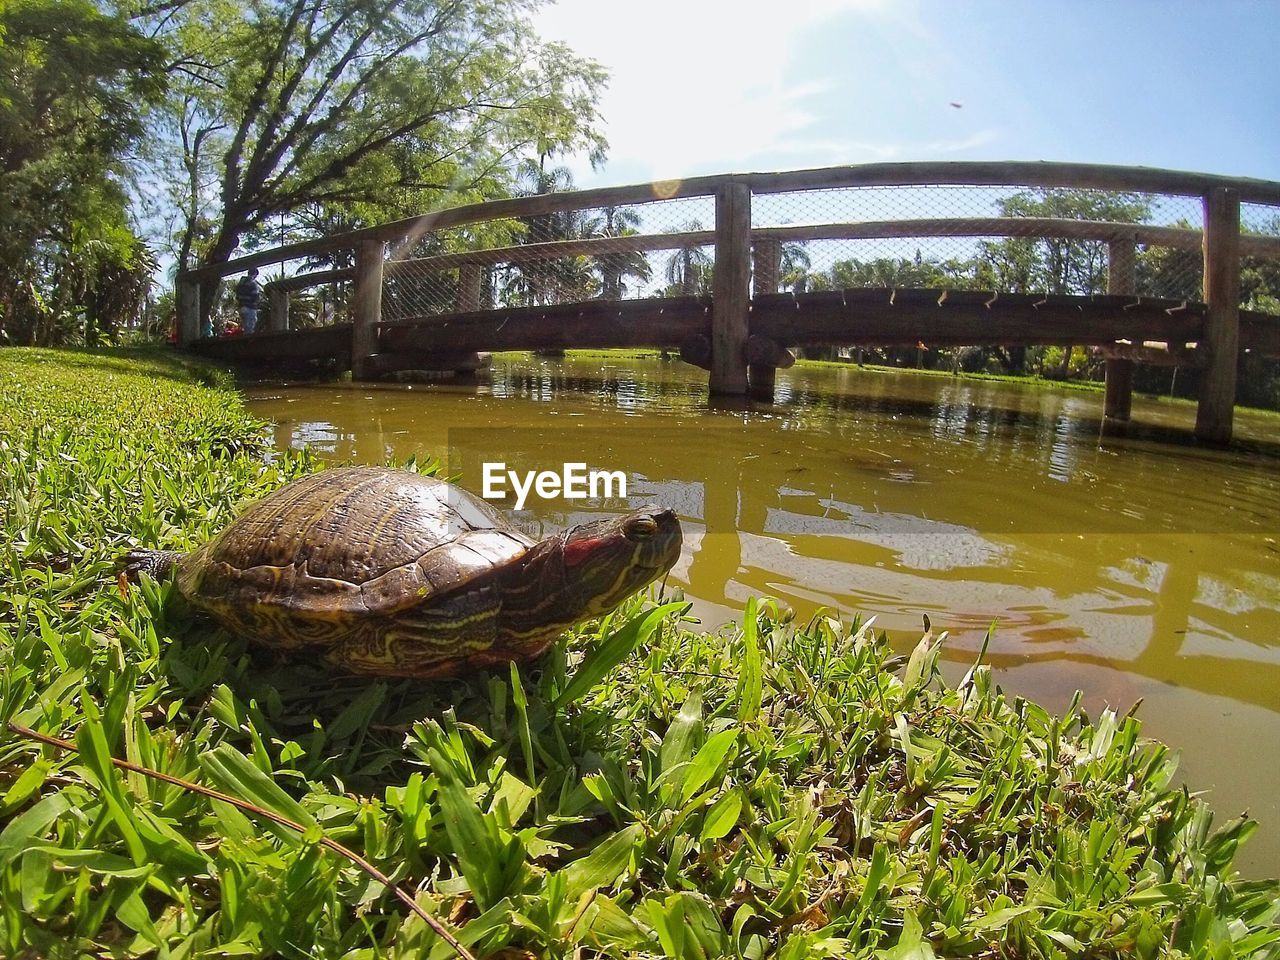 VIEW OF TURTLE IN LAKE